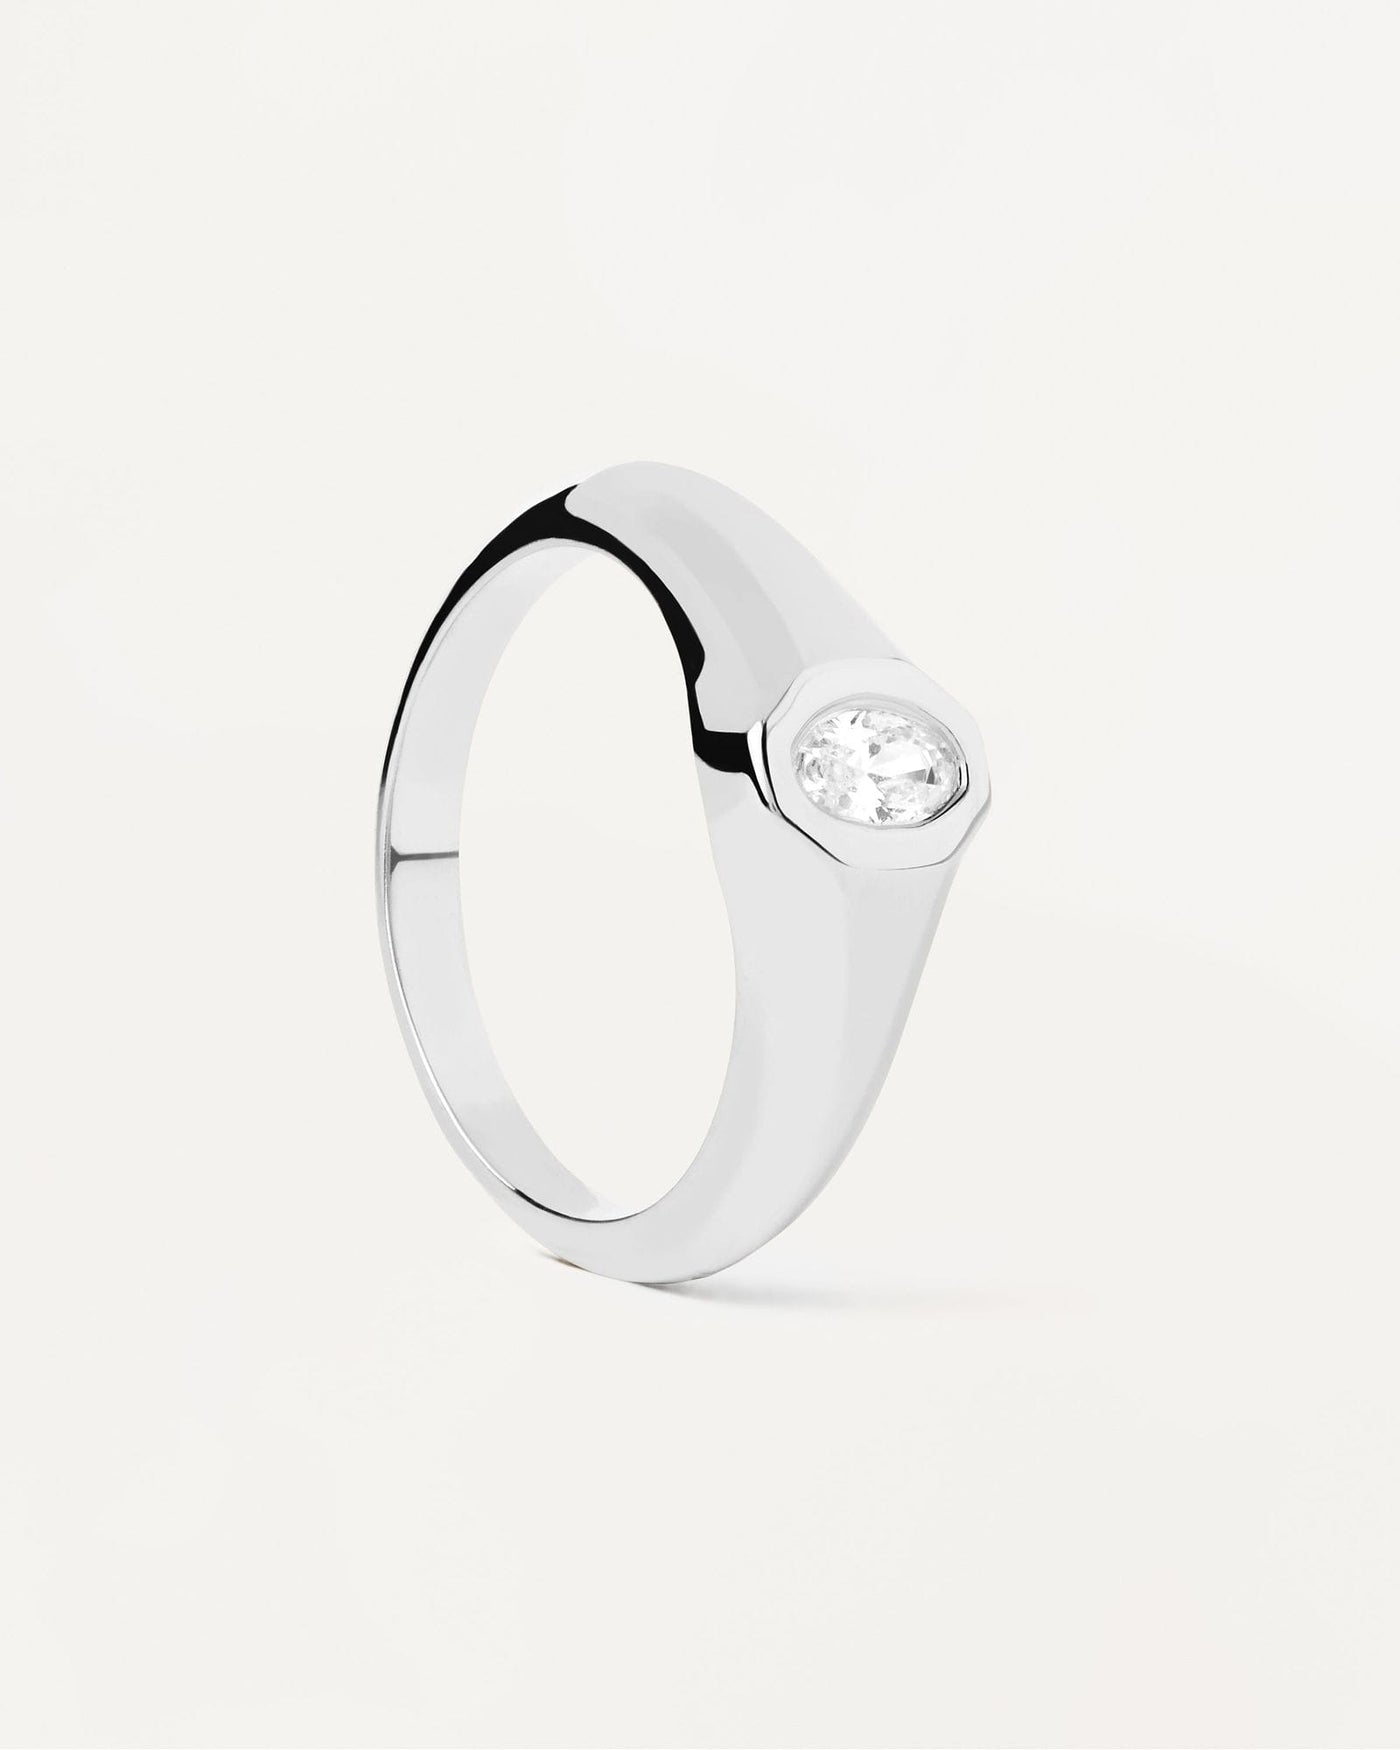 2024 Selection | Karry Stamp Silver Ring. Sterling silver signet ring with oval white zirconia. Get the latest arrival from PDPAOLA. Place your order safely and get this Best Seller. Free Shipping.